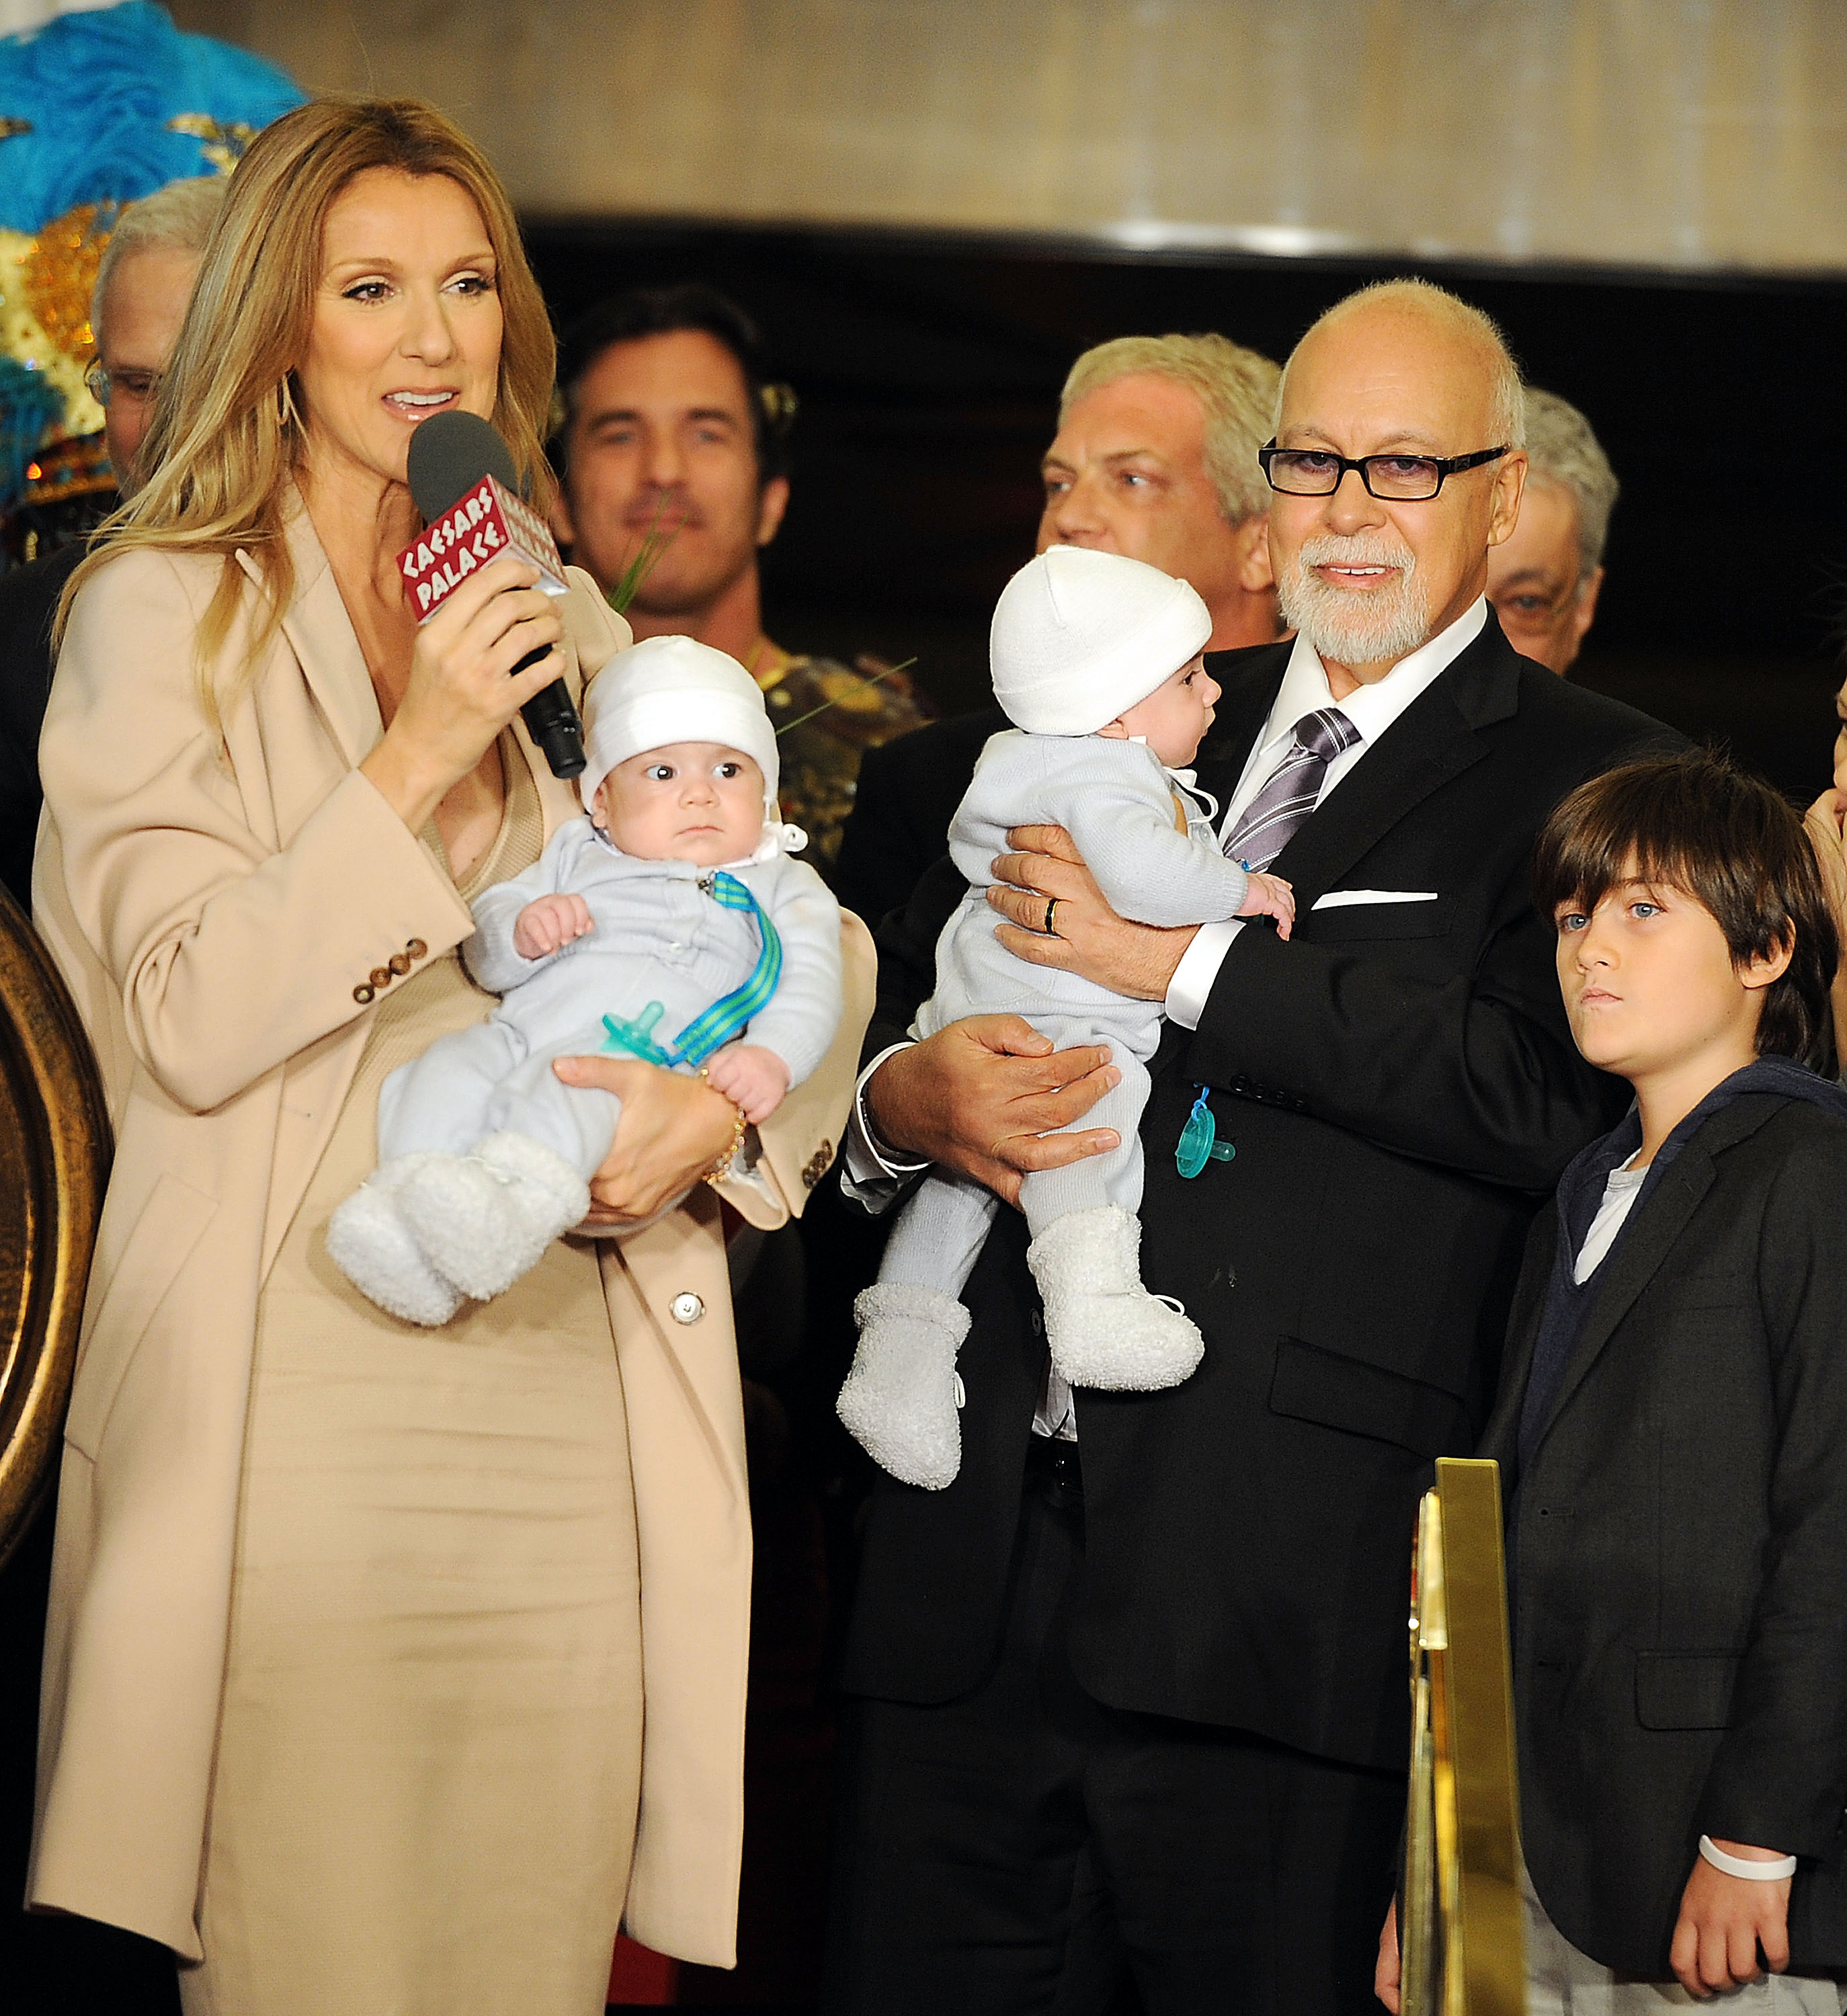 Celine Dion, Nelson Dion Angelil, Eddy Dion Angelil, Rene Angelil, and Rene-Charles Dion Angelil at Caesars Palace on February 16, 2011 in Las Vegas. | Source: Getty Images